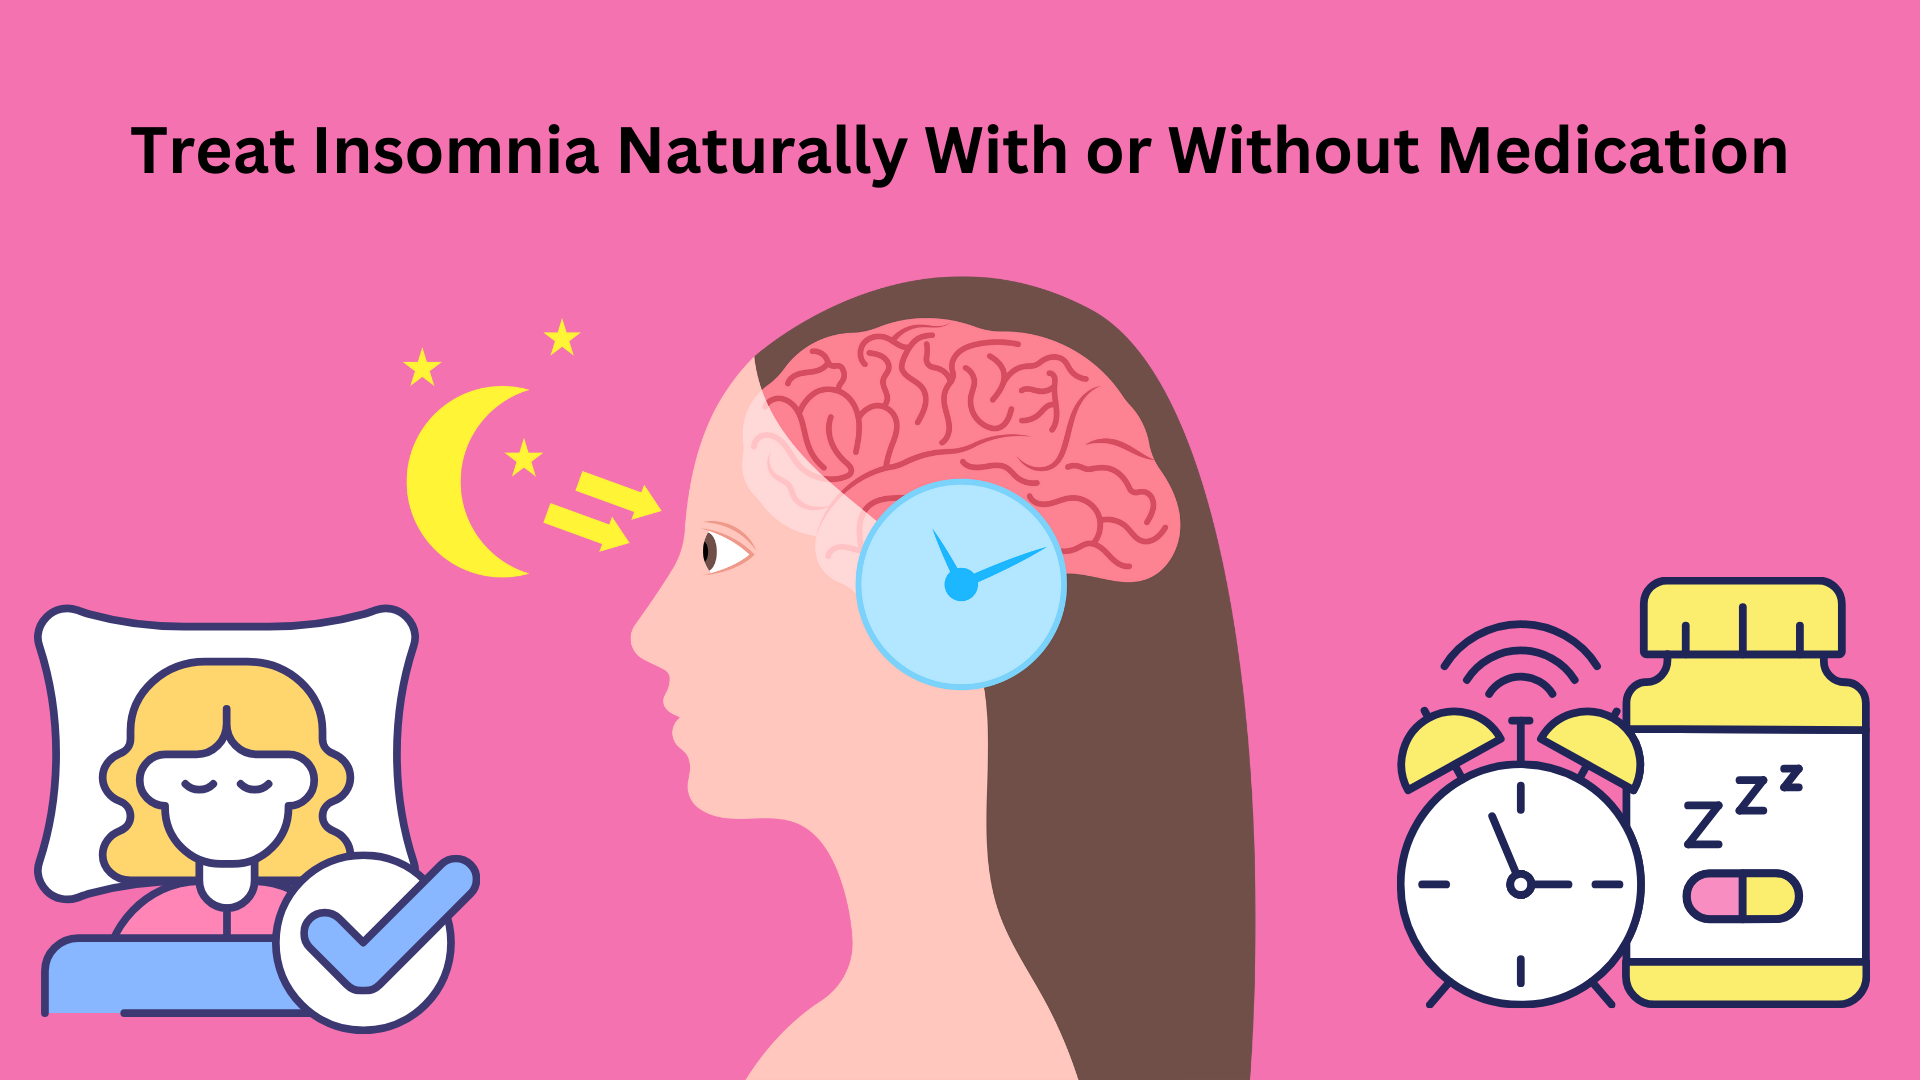 How to Treat Insomnia Naturally With or Without Medication? 6